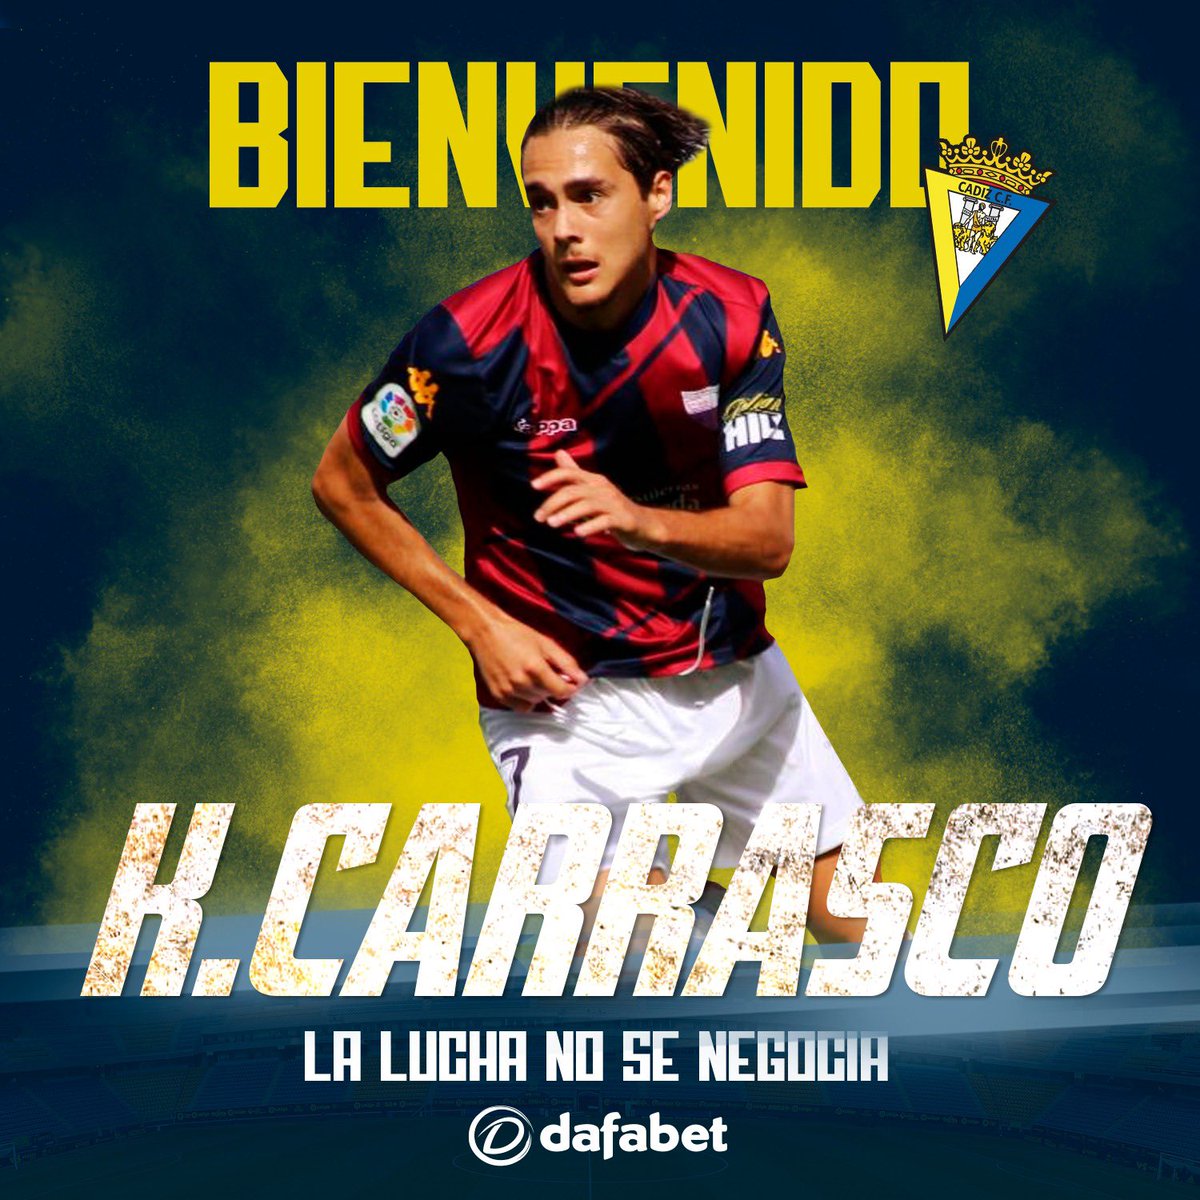 DONE DEAL - August 25KIKE CARRASCO (Extremadura to Cádiz )Age: 22Country: Spain  Position: WingerFee: FreeContract: Until 2022  #LLL